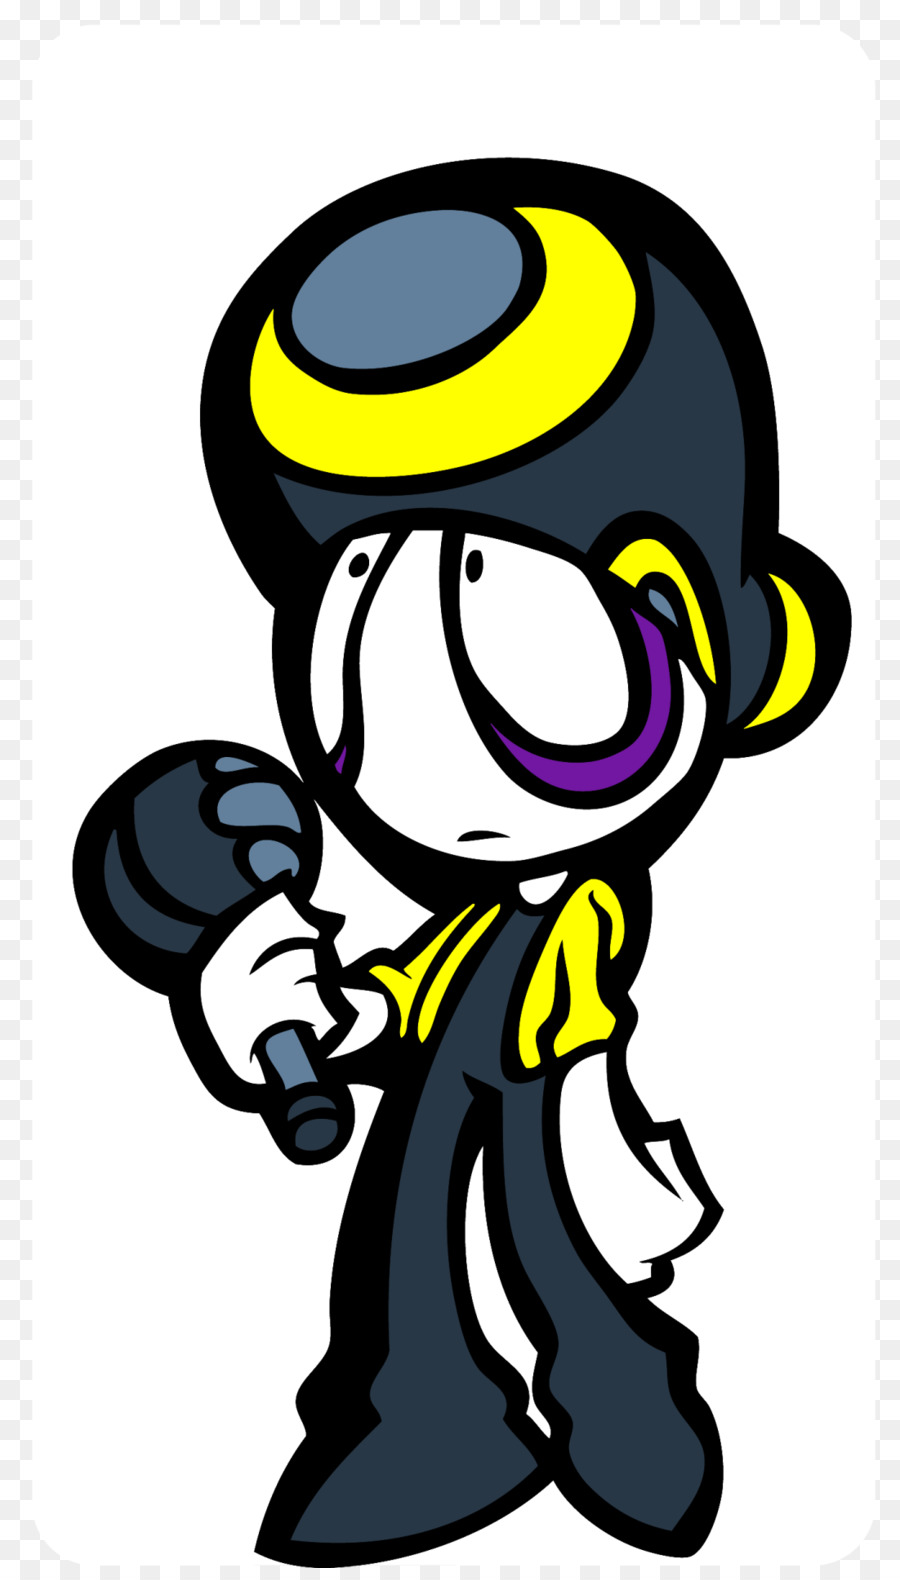 Im Chicago-Stil Pizza Pizza Party rebeltaxi Pan Pizza - Pan